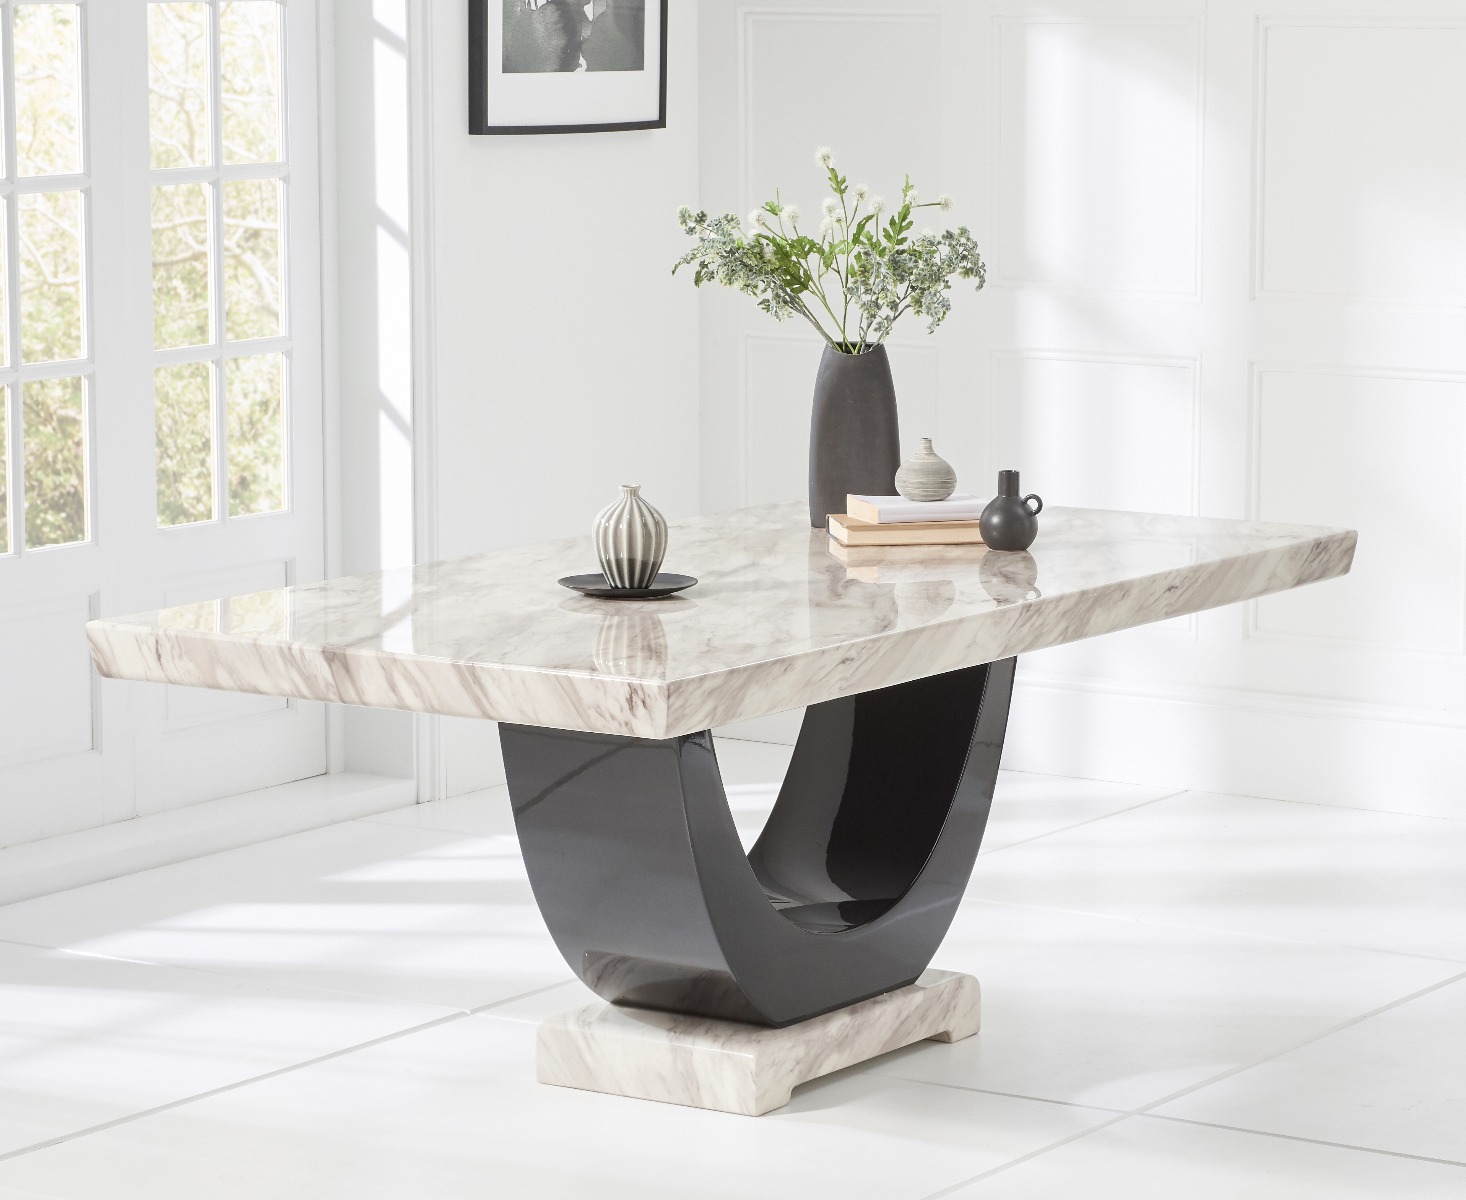 Photo 4 of Novara 200cm cream and black pedestal marble dining table with 10 grey sophia chairs